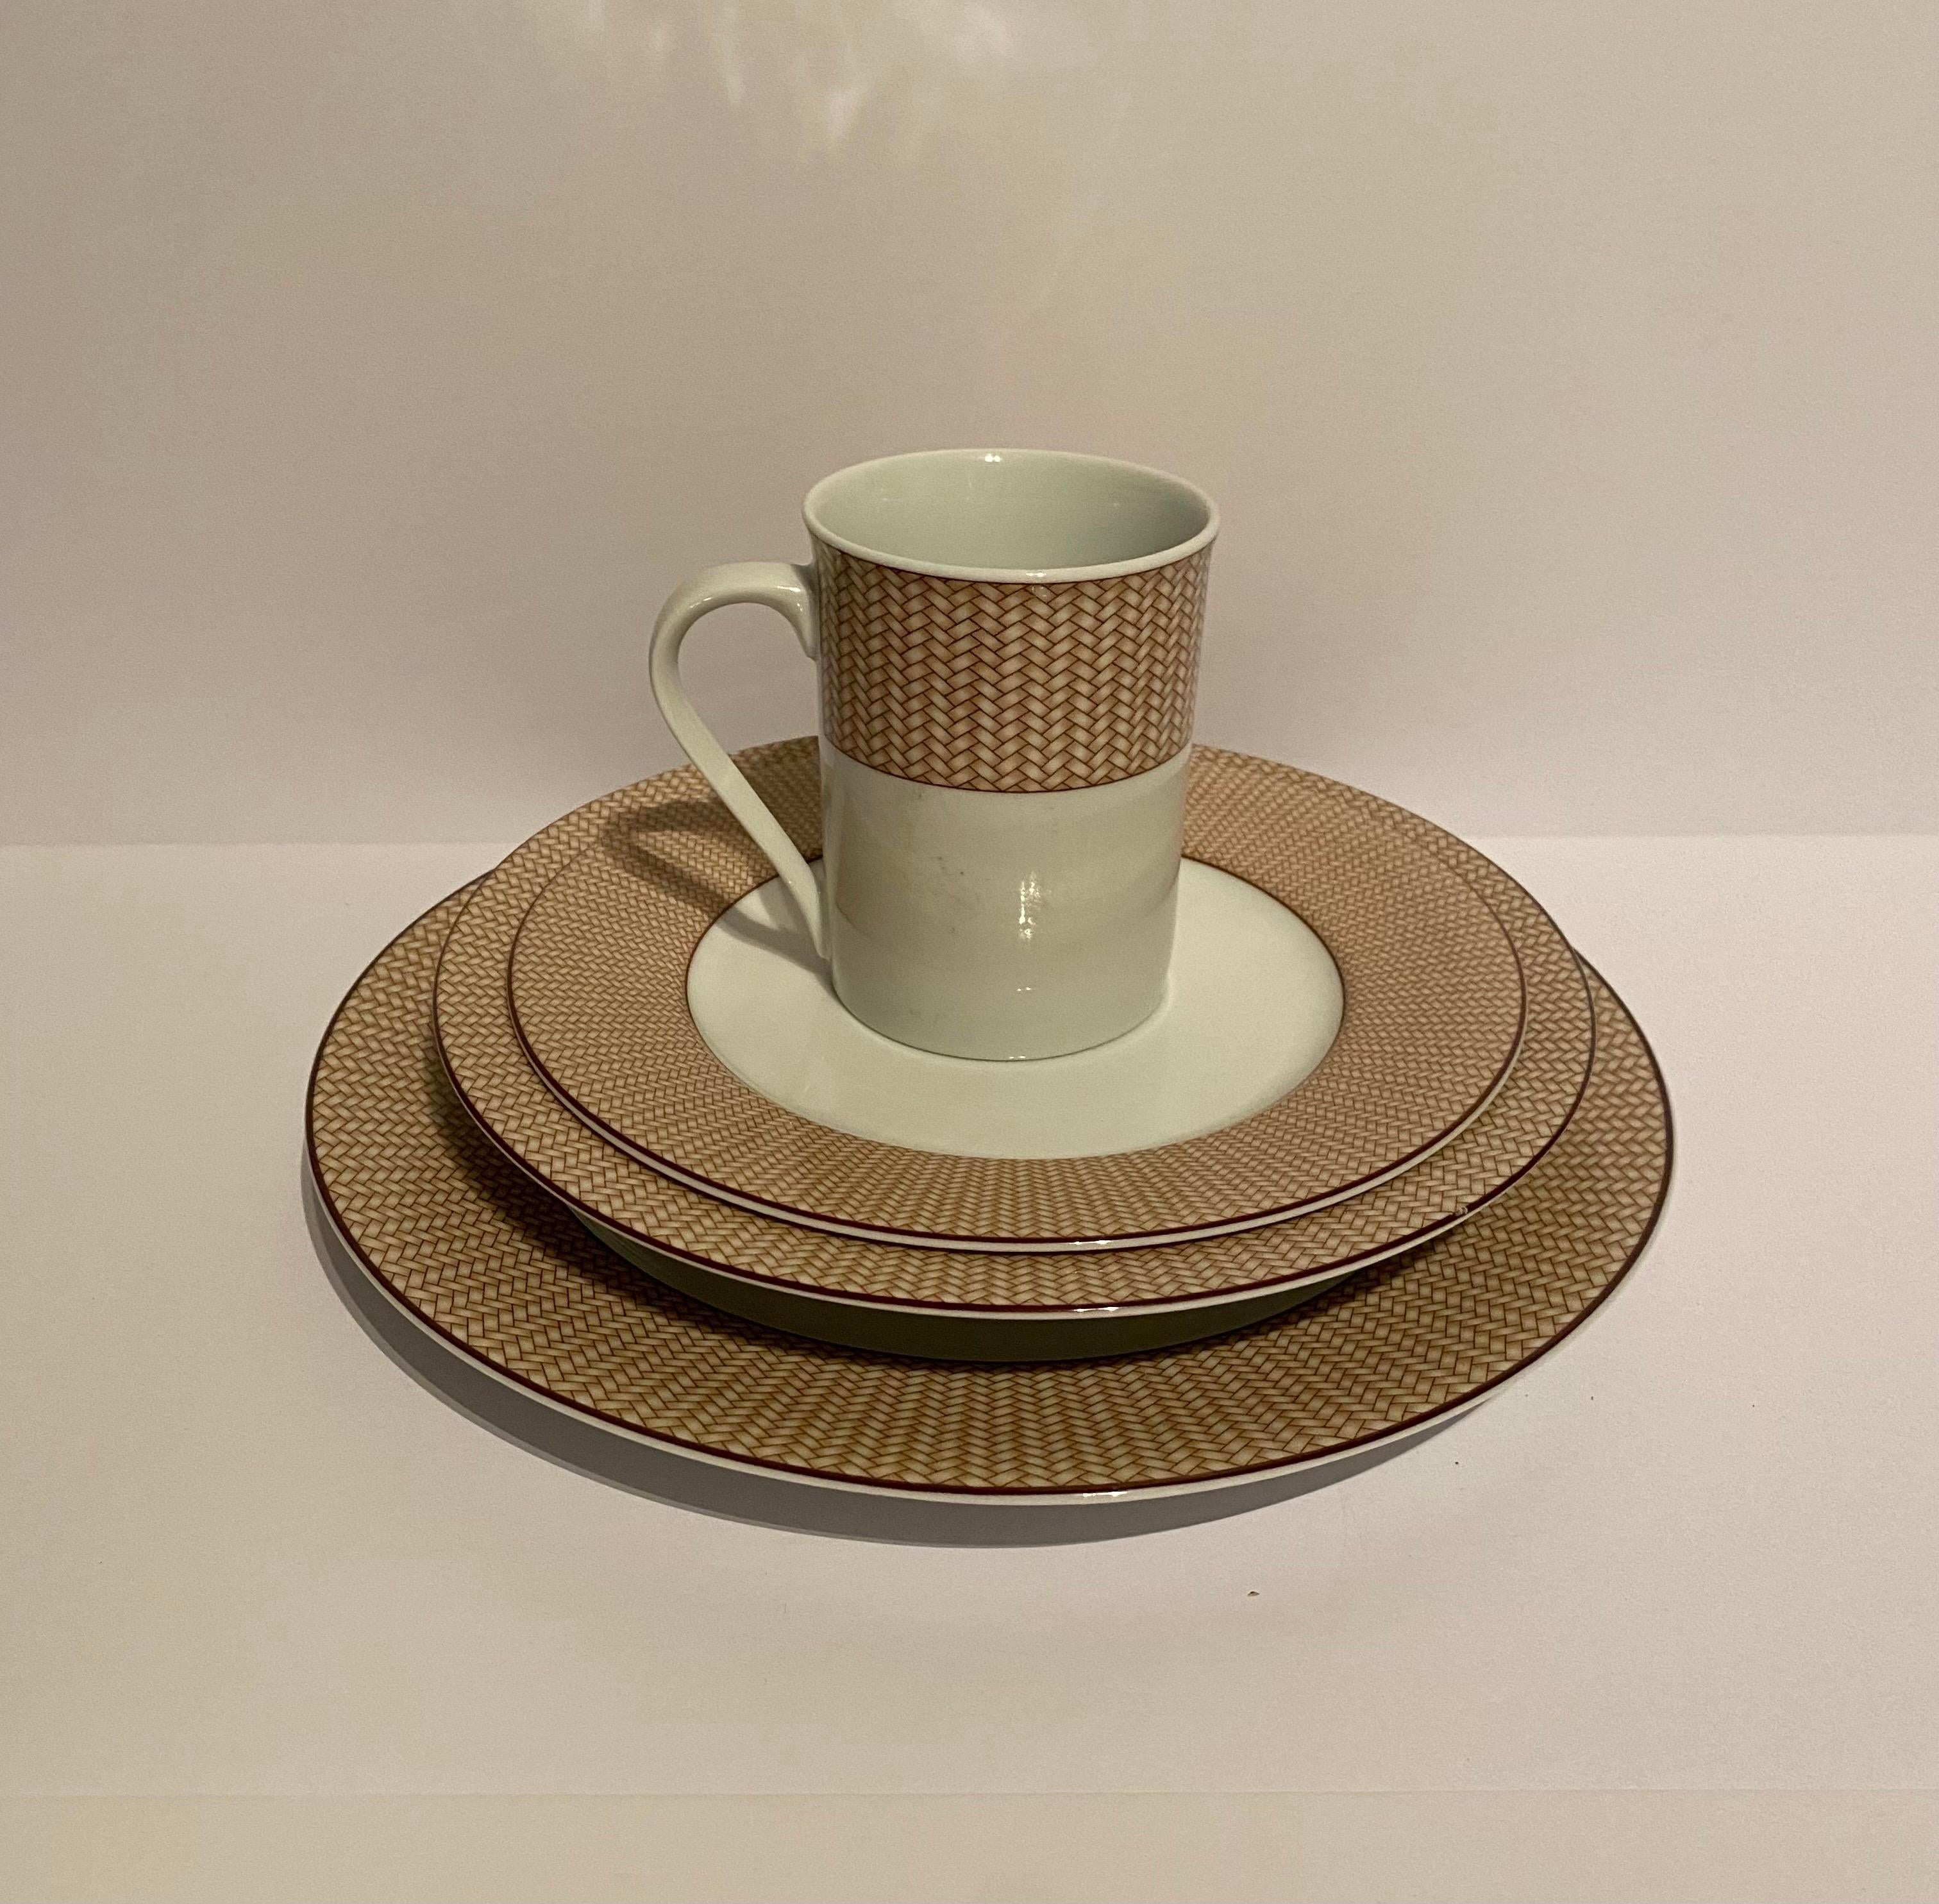 A 32 (thirty-two) piece set of dinnerware by Lauren/Ralph Lauren in the Reed Natural pattern.

Features a tan wicker patterned border on white complemented by brown trim.

Includes 8 four piece-settings; each setting includes the following 8